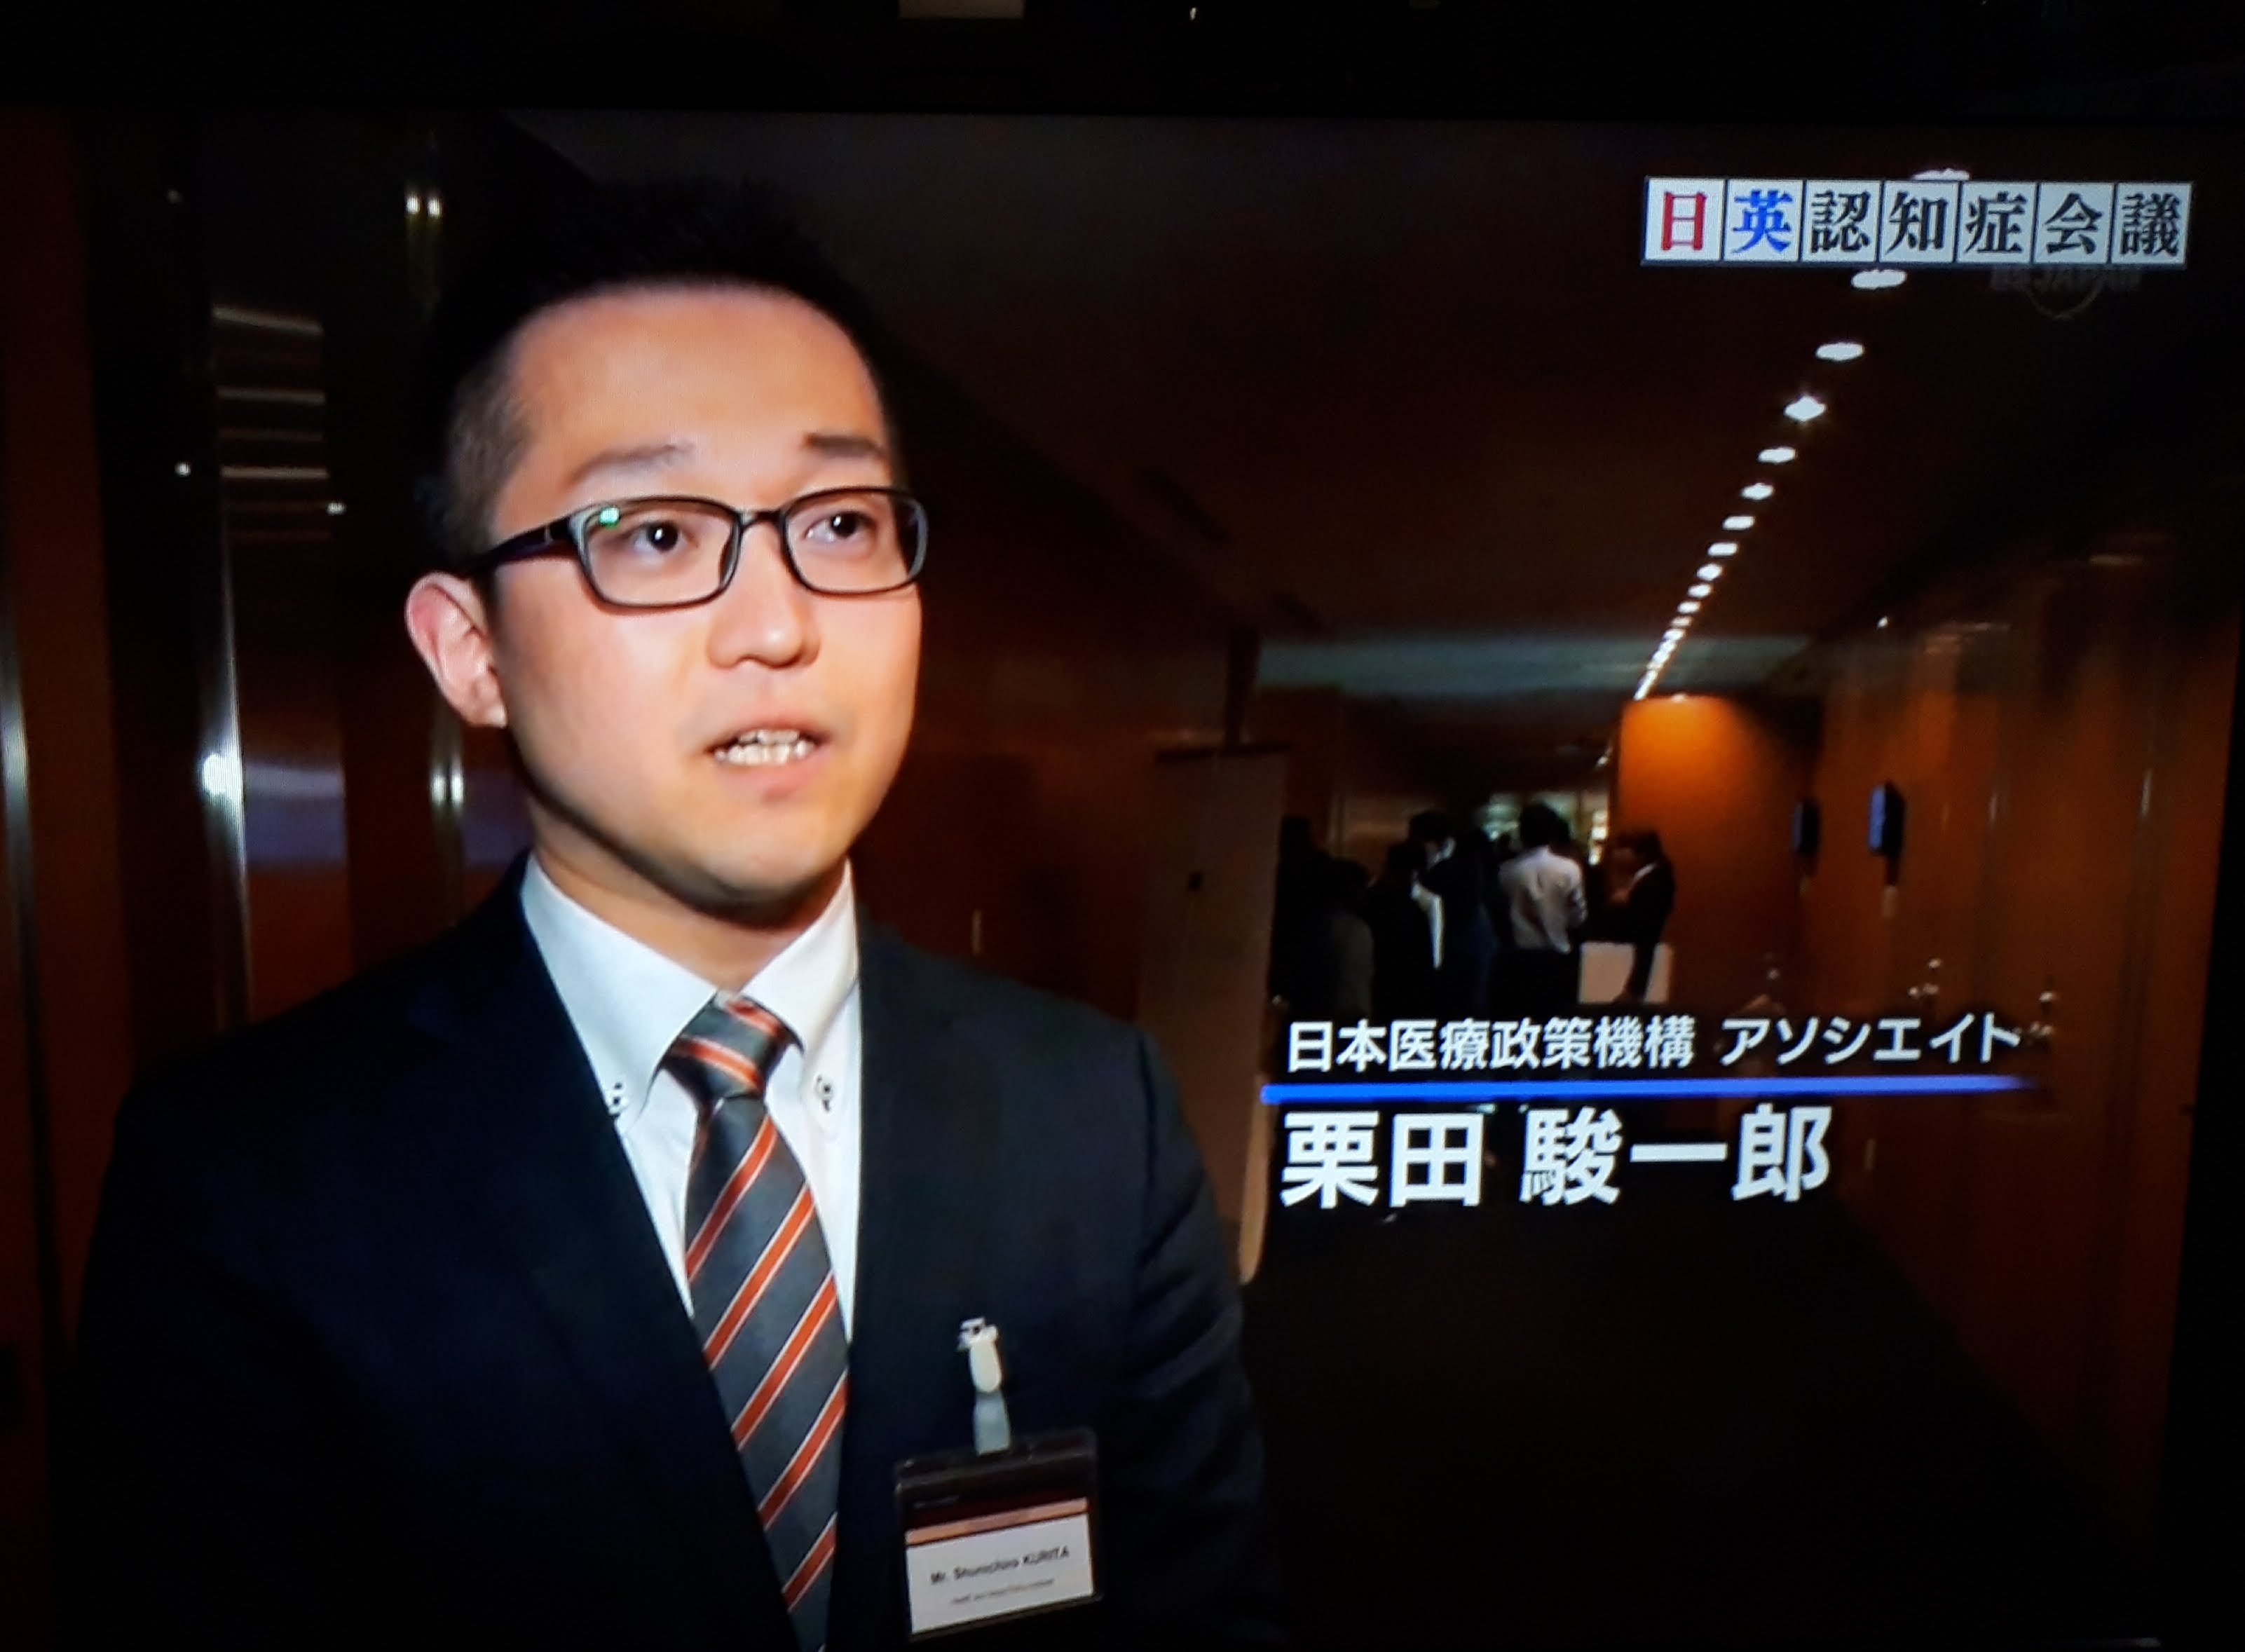 [In the media] Global Action Against Dementia and the Japanese Case (BS JAPAN, March 21, 2018)